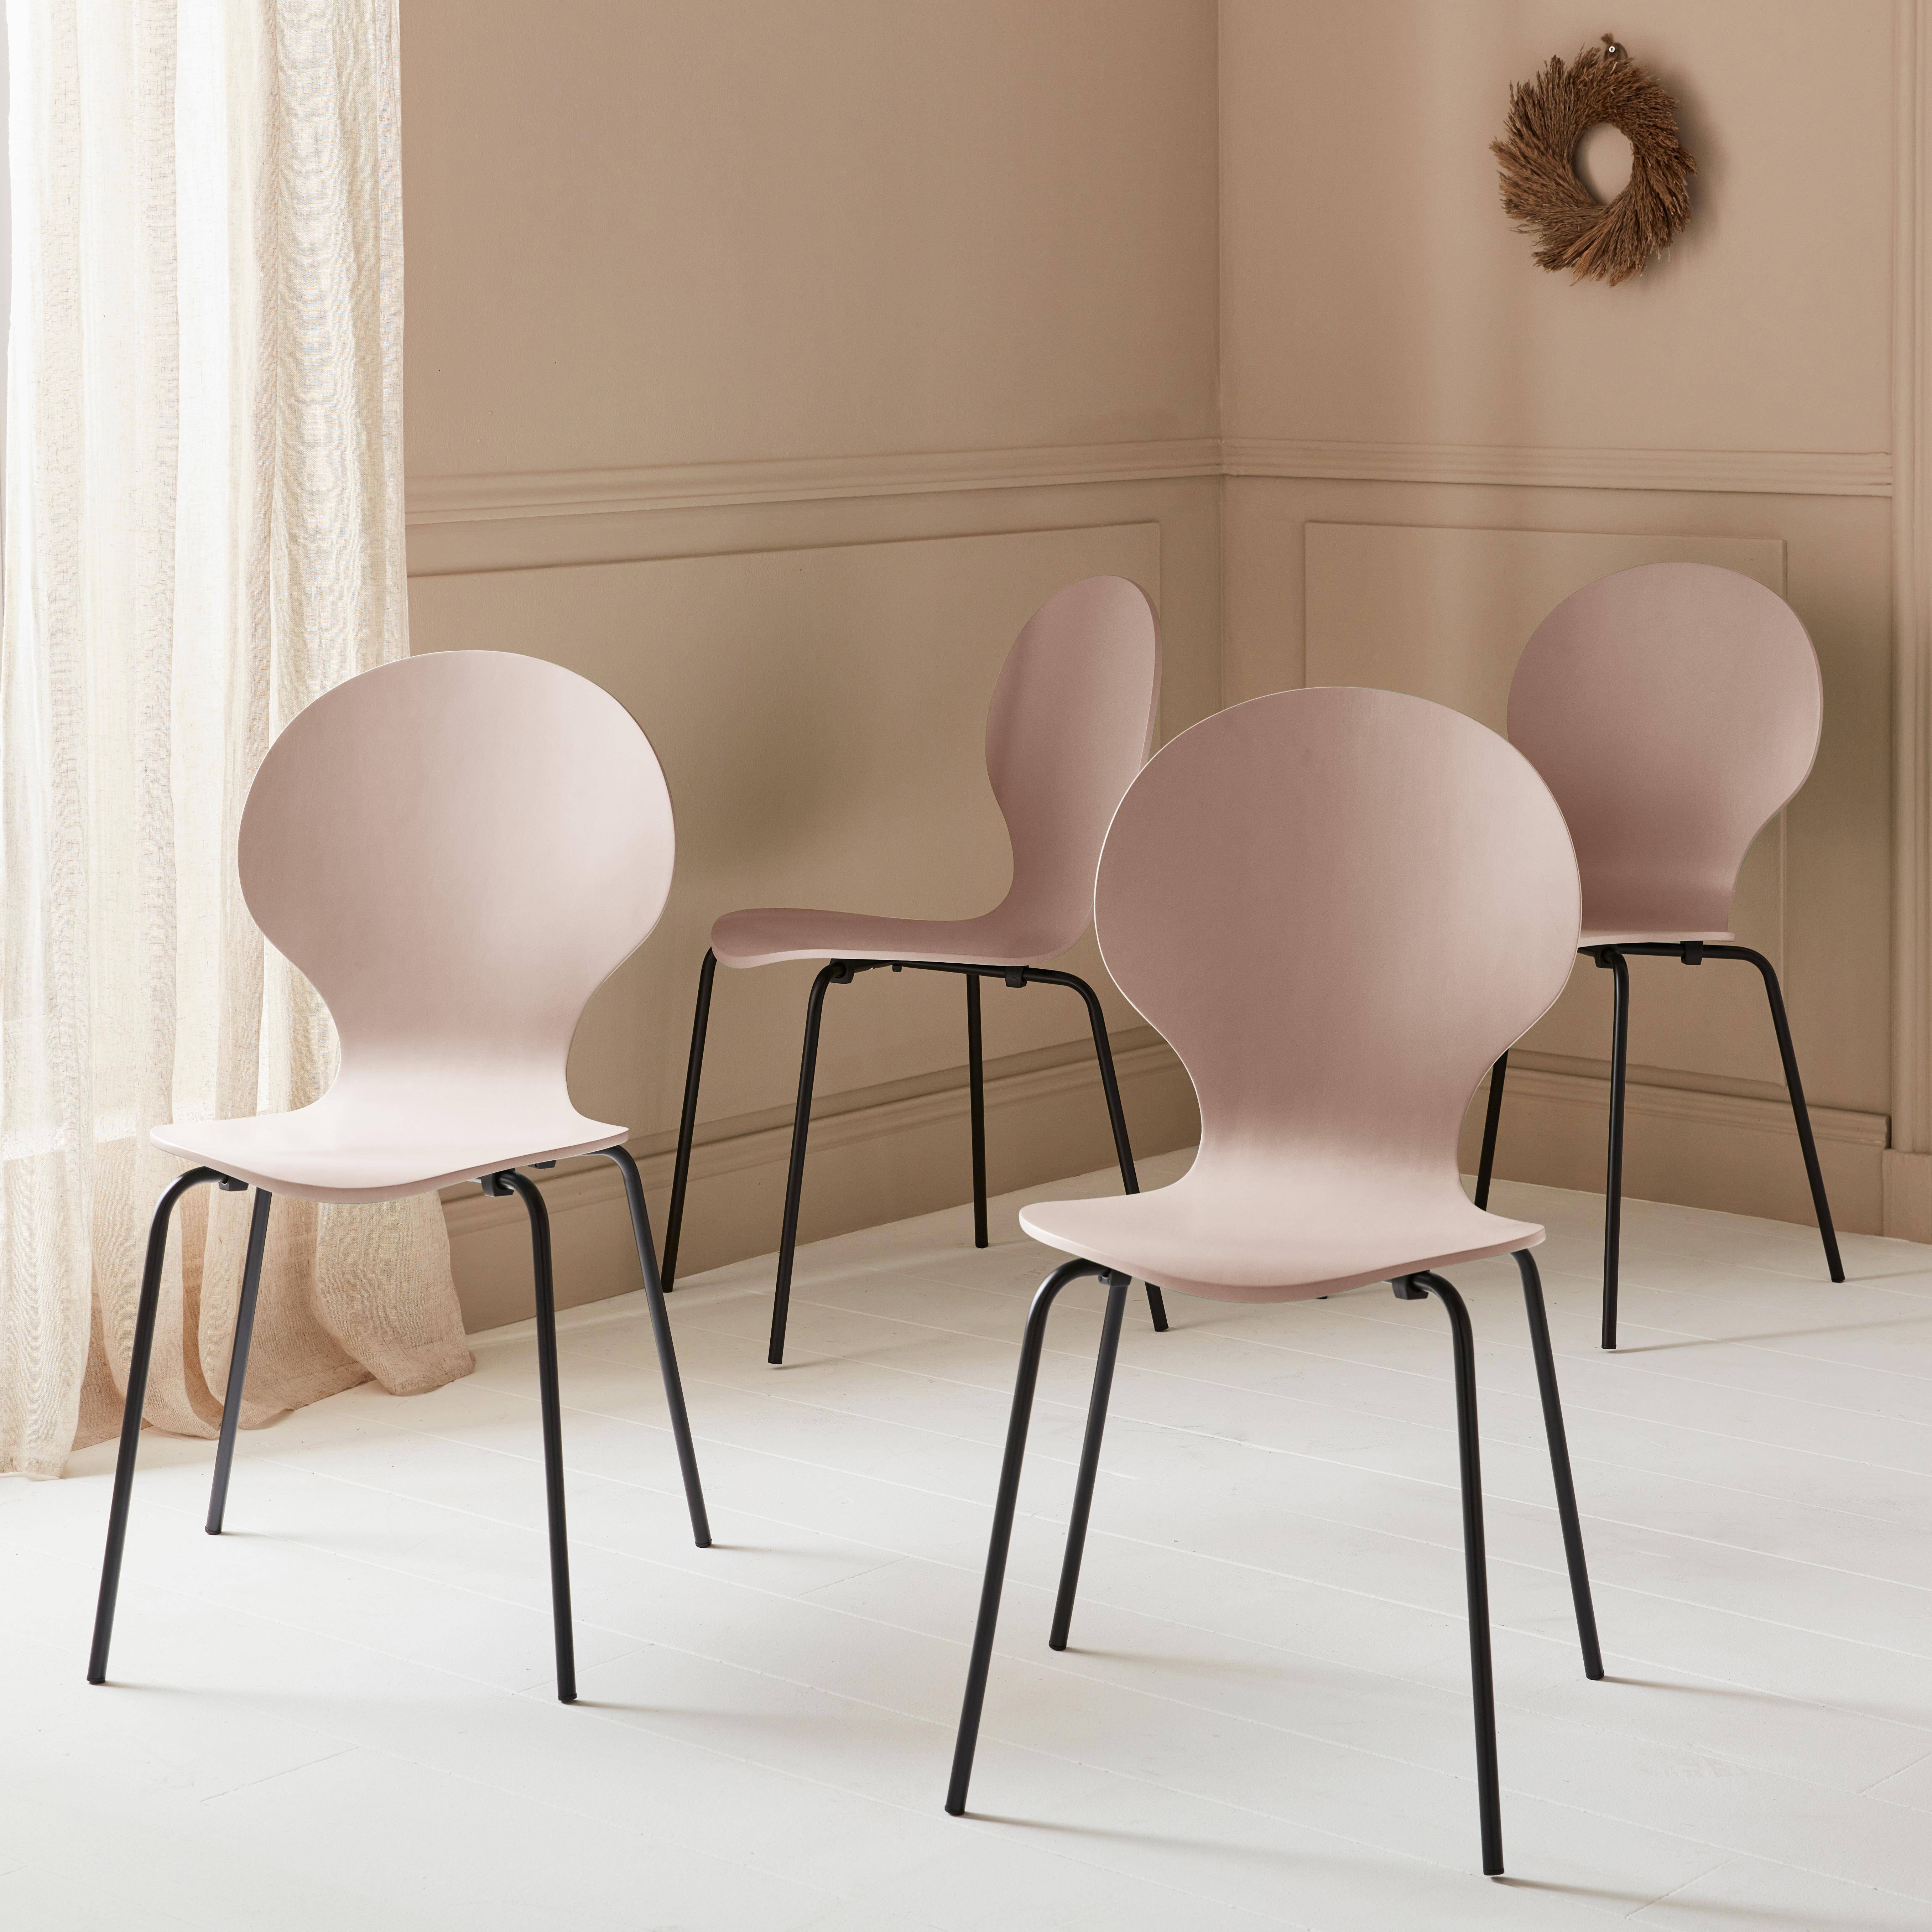 Set of 4 stackable Retro Chairs, Wood and Plywood, L43xW48xH87cm, pink,sweeek,Photo2